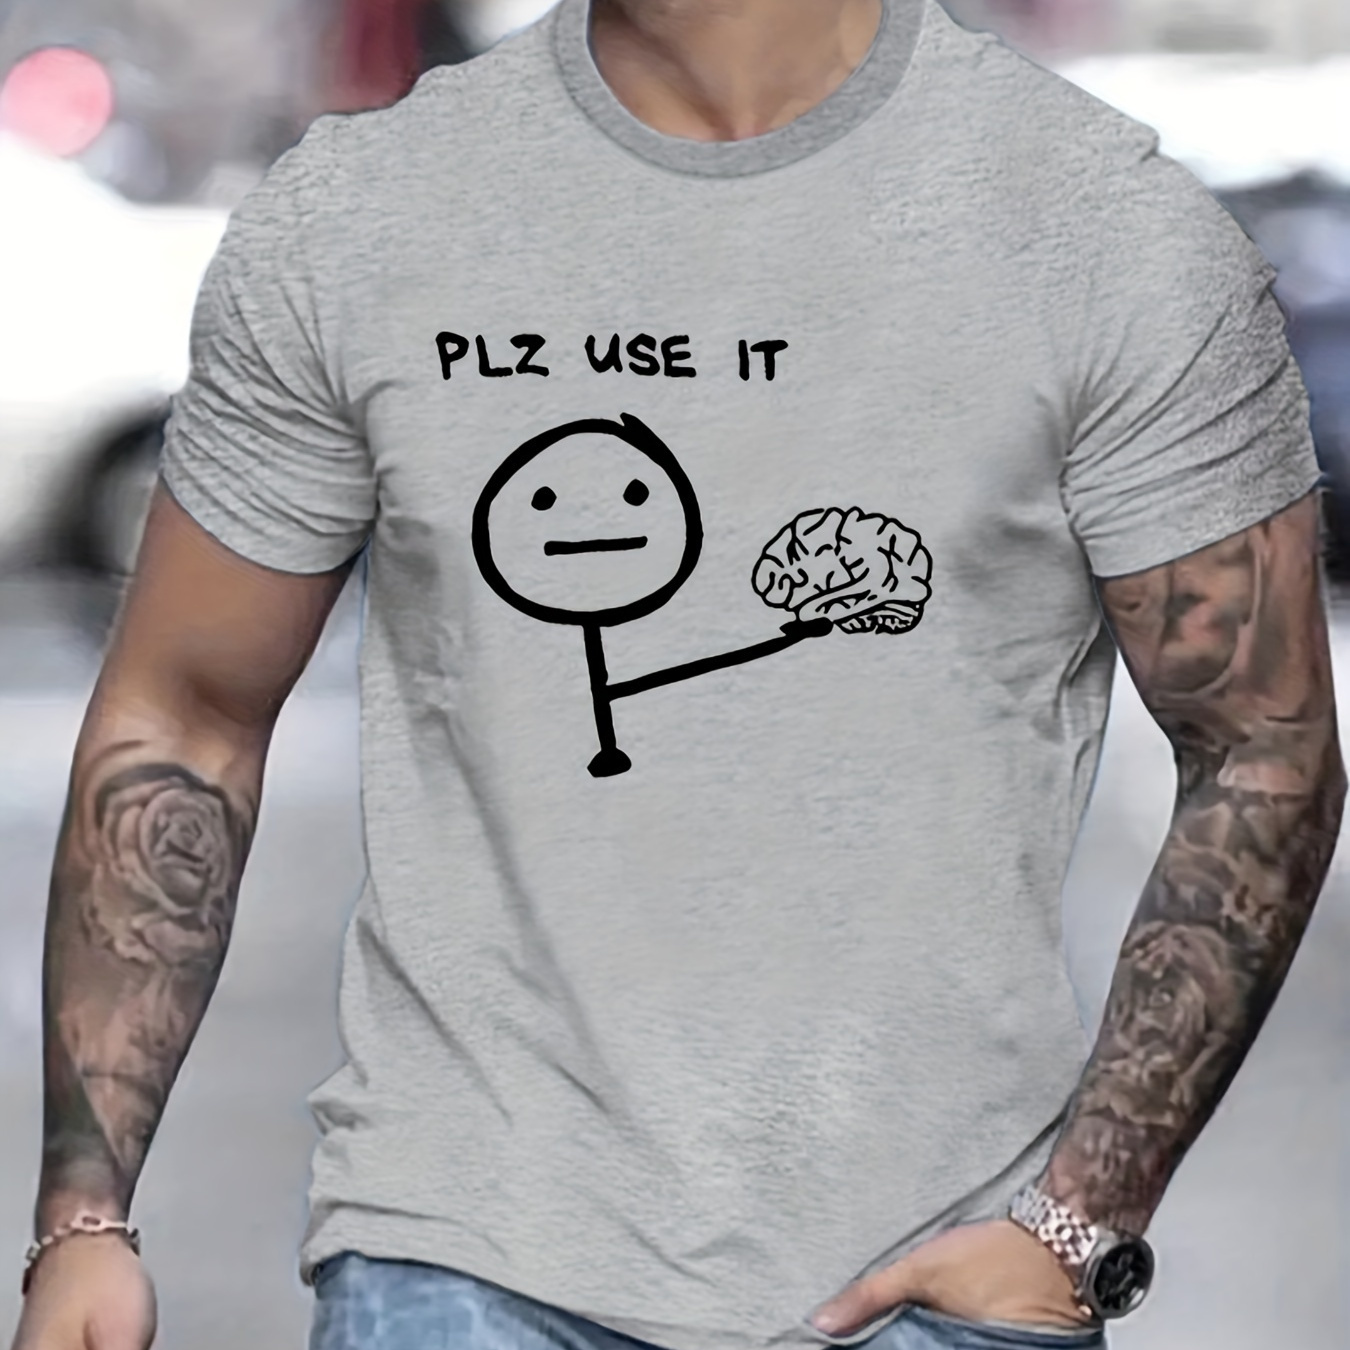 

Plz Use The Brain Print T Shirt, Tees For Men, Casual Short Sleeve T-shirt For Summer